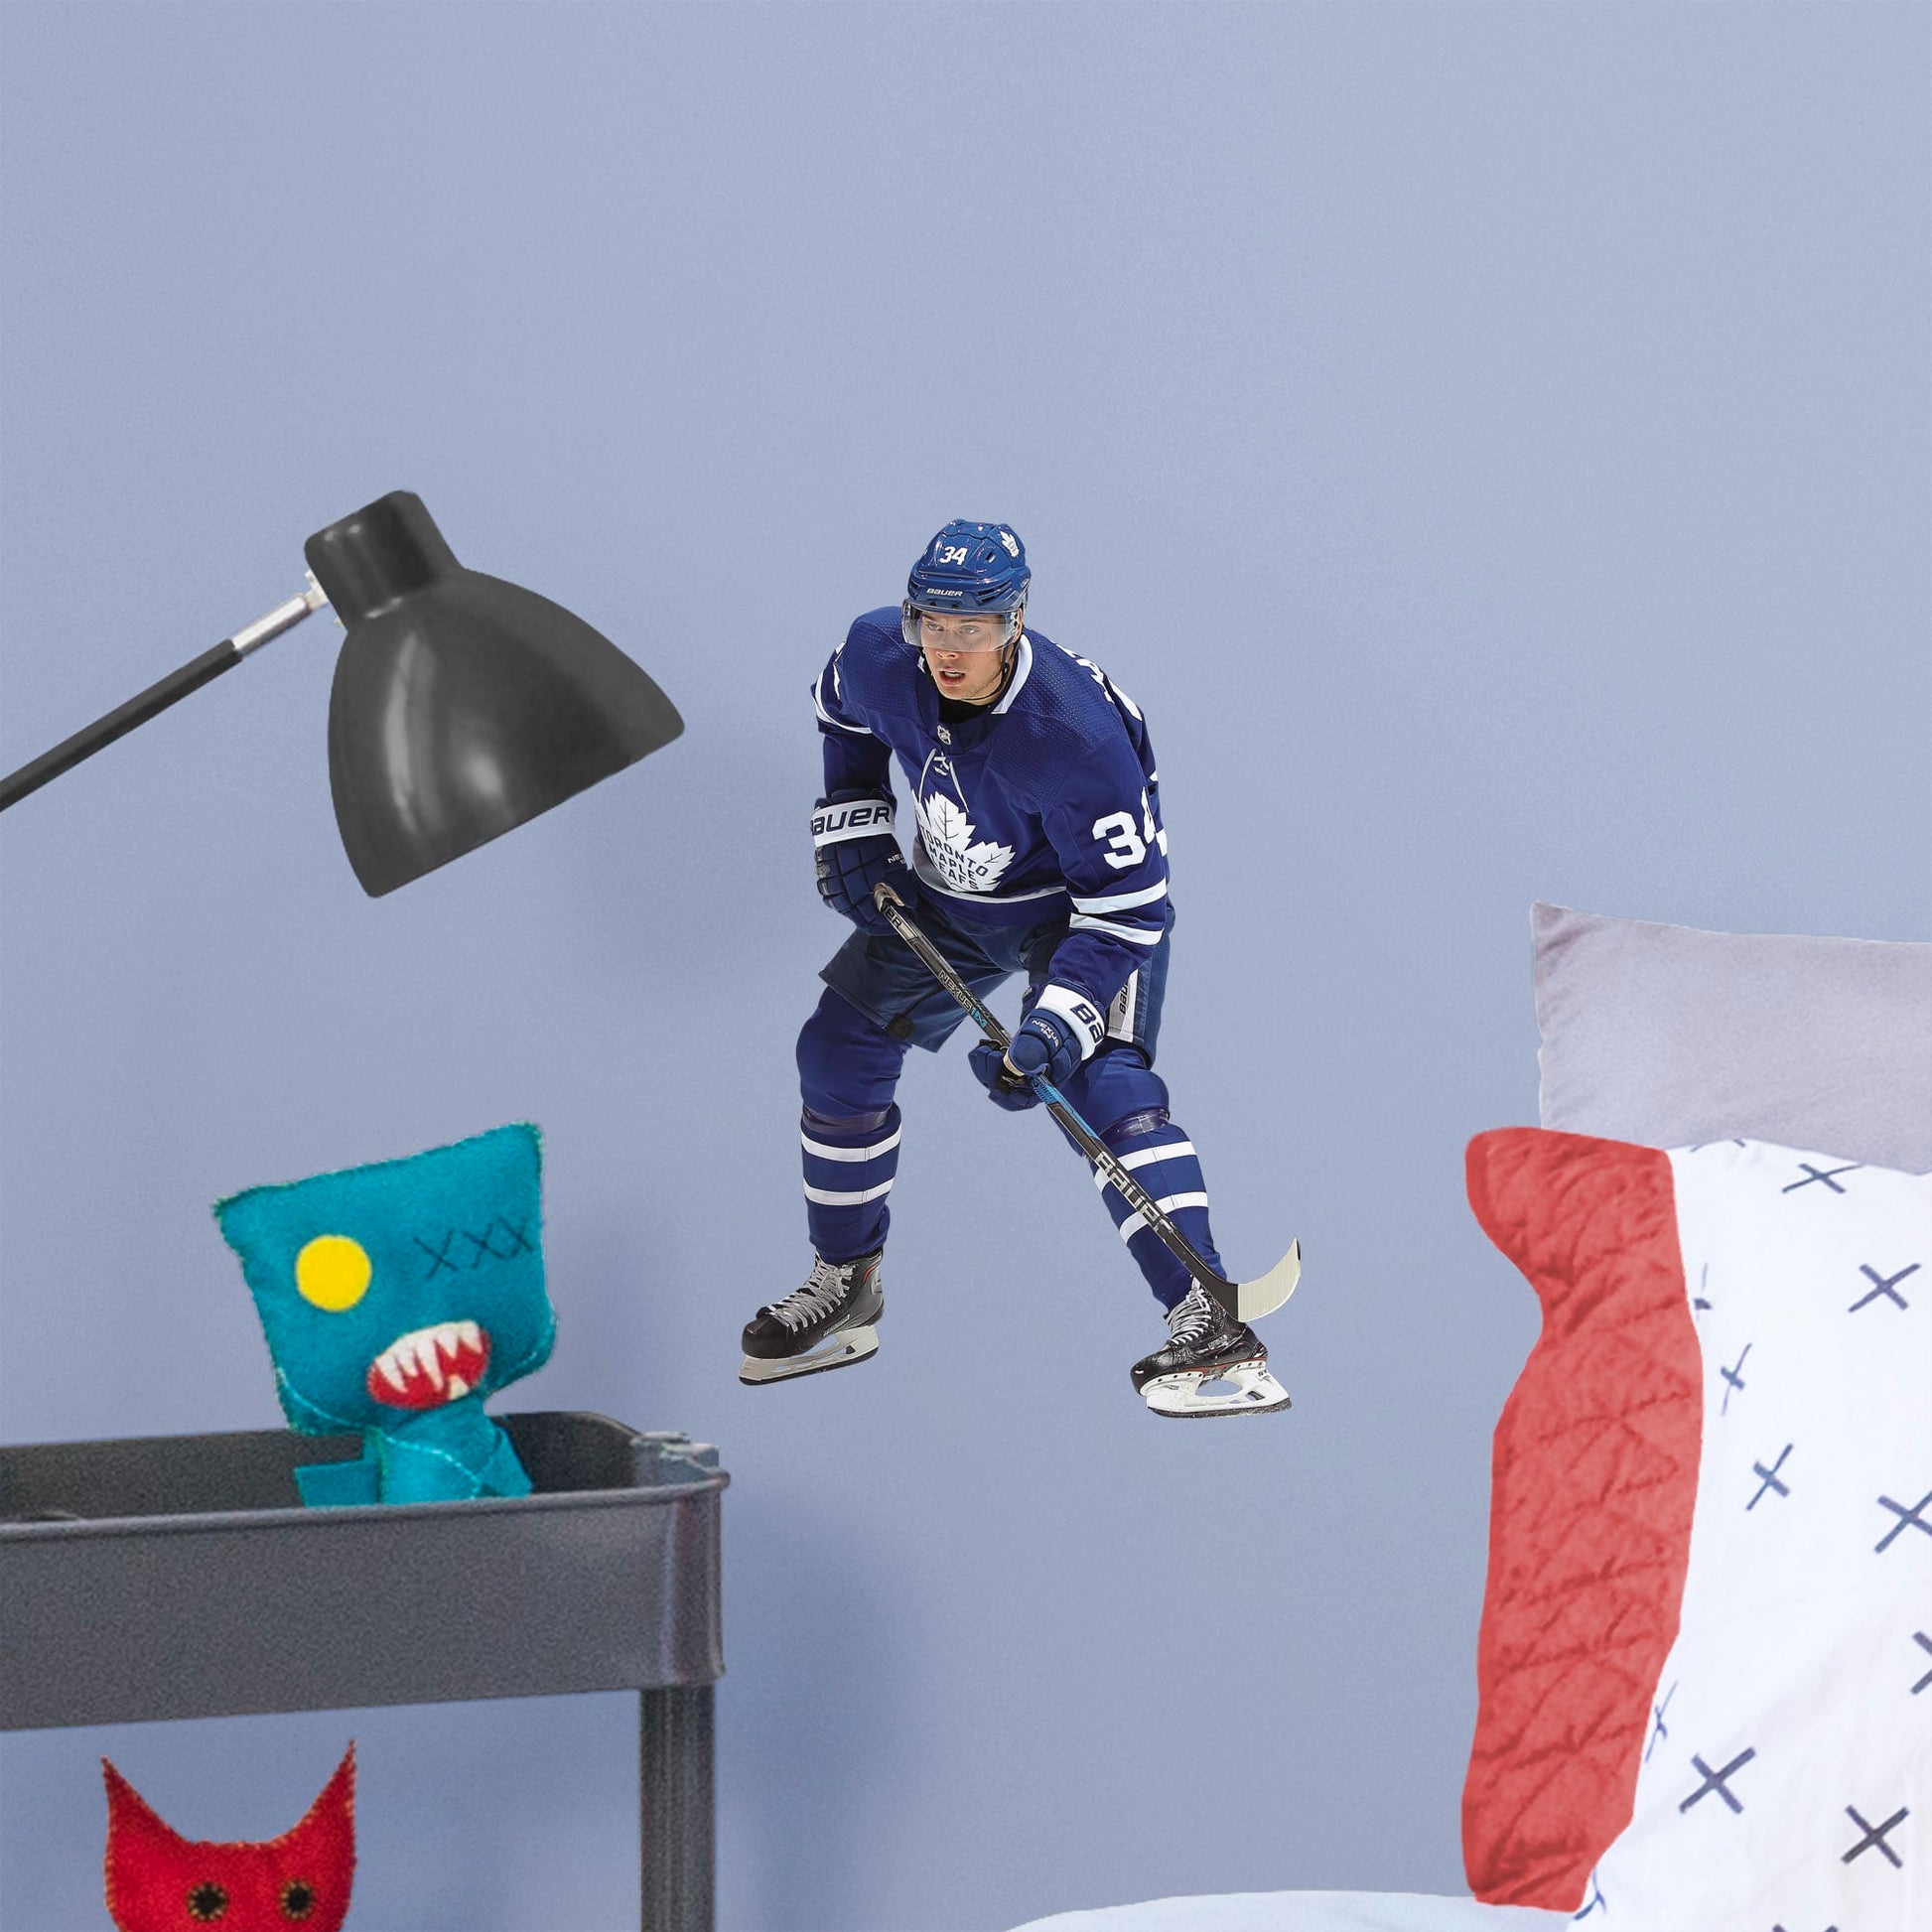 Large Athlete + 2 Decals (10"W x 17"H) He was the first NHL player in modern history to land four goals in his league debut, and now, you can make the Toronto Maple Leafs’ center Auston Matthews part of your bedroom, hallway or game room. Affectionately known as Matty, Austino and Mustache, among other monikers, this durable, tear-resistant NHL wall decal features No. 34 in his navy blue and white Maple Leafs best.